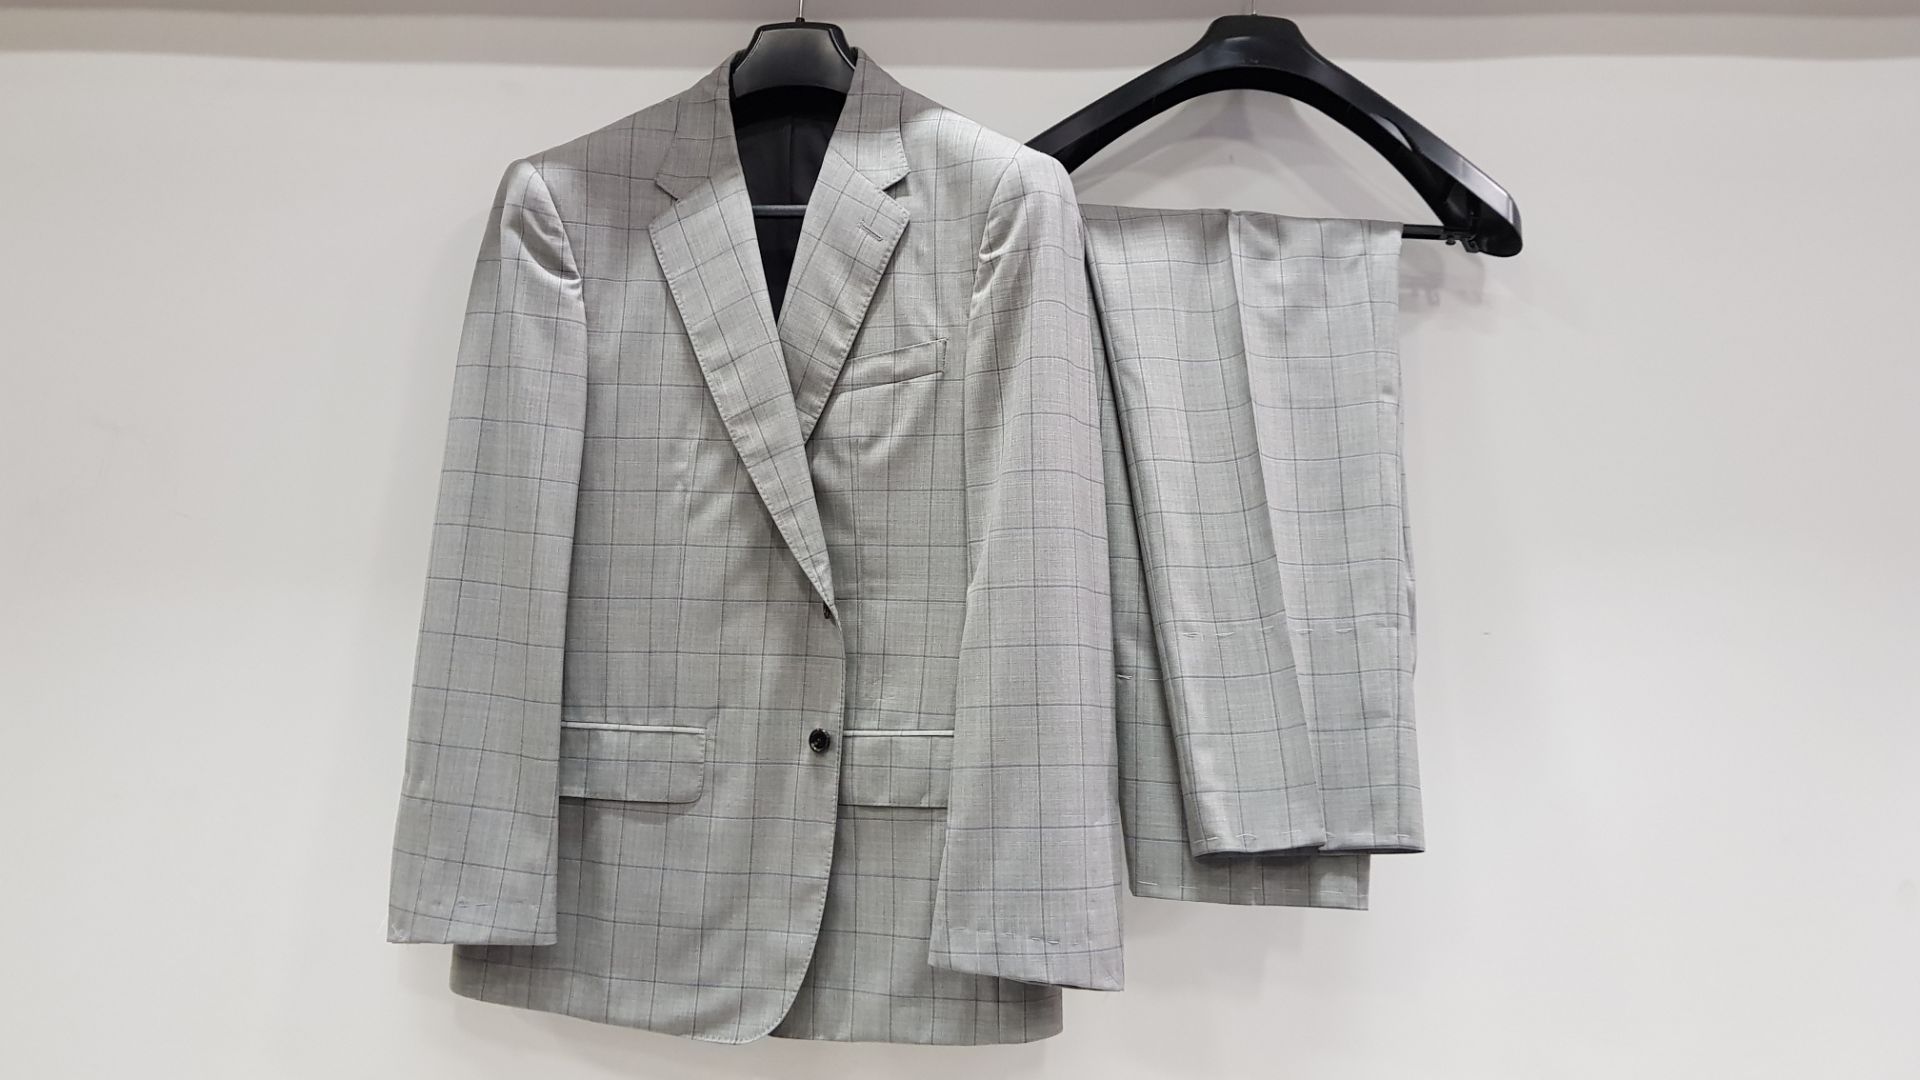 3 X BRAND NEW LUTWYCHE HAND TAILORED GREY CHEQUERED SUITS SIZE 40R, 38S AND 44R (PLEASE NOTE SUITS